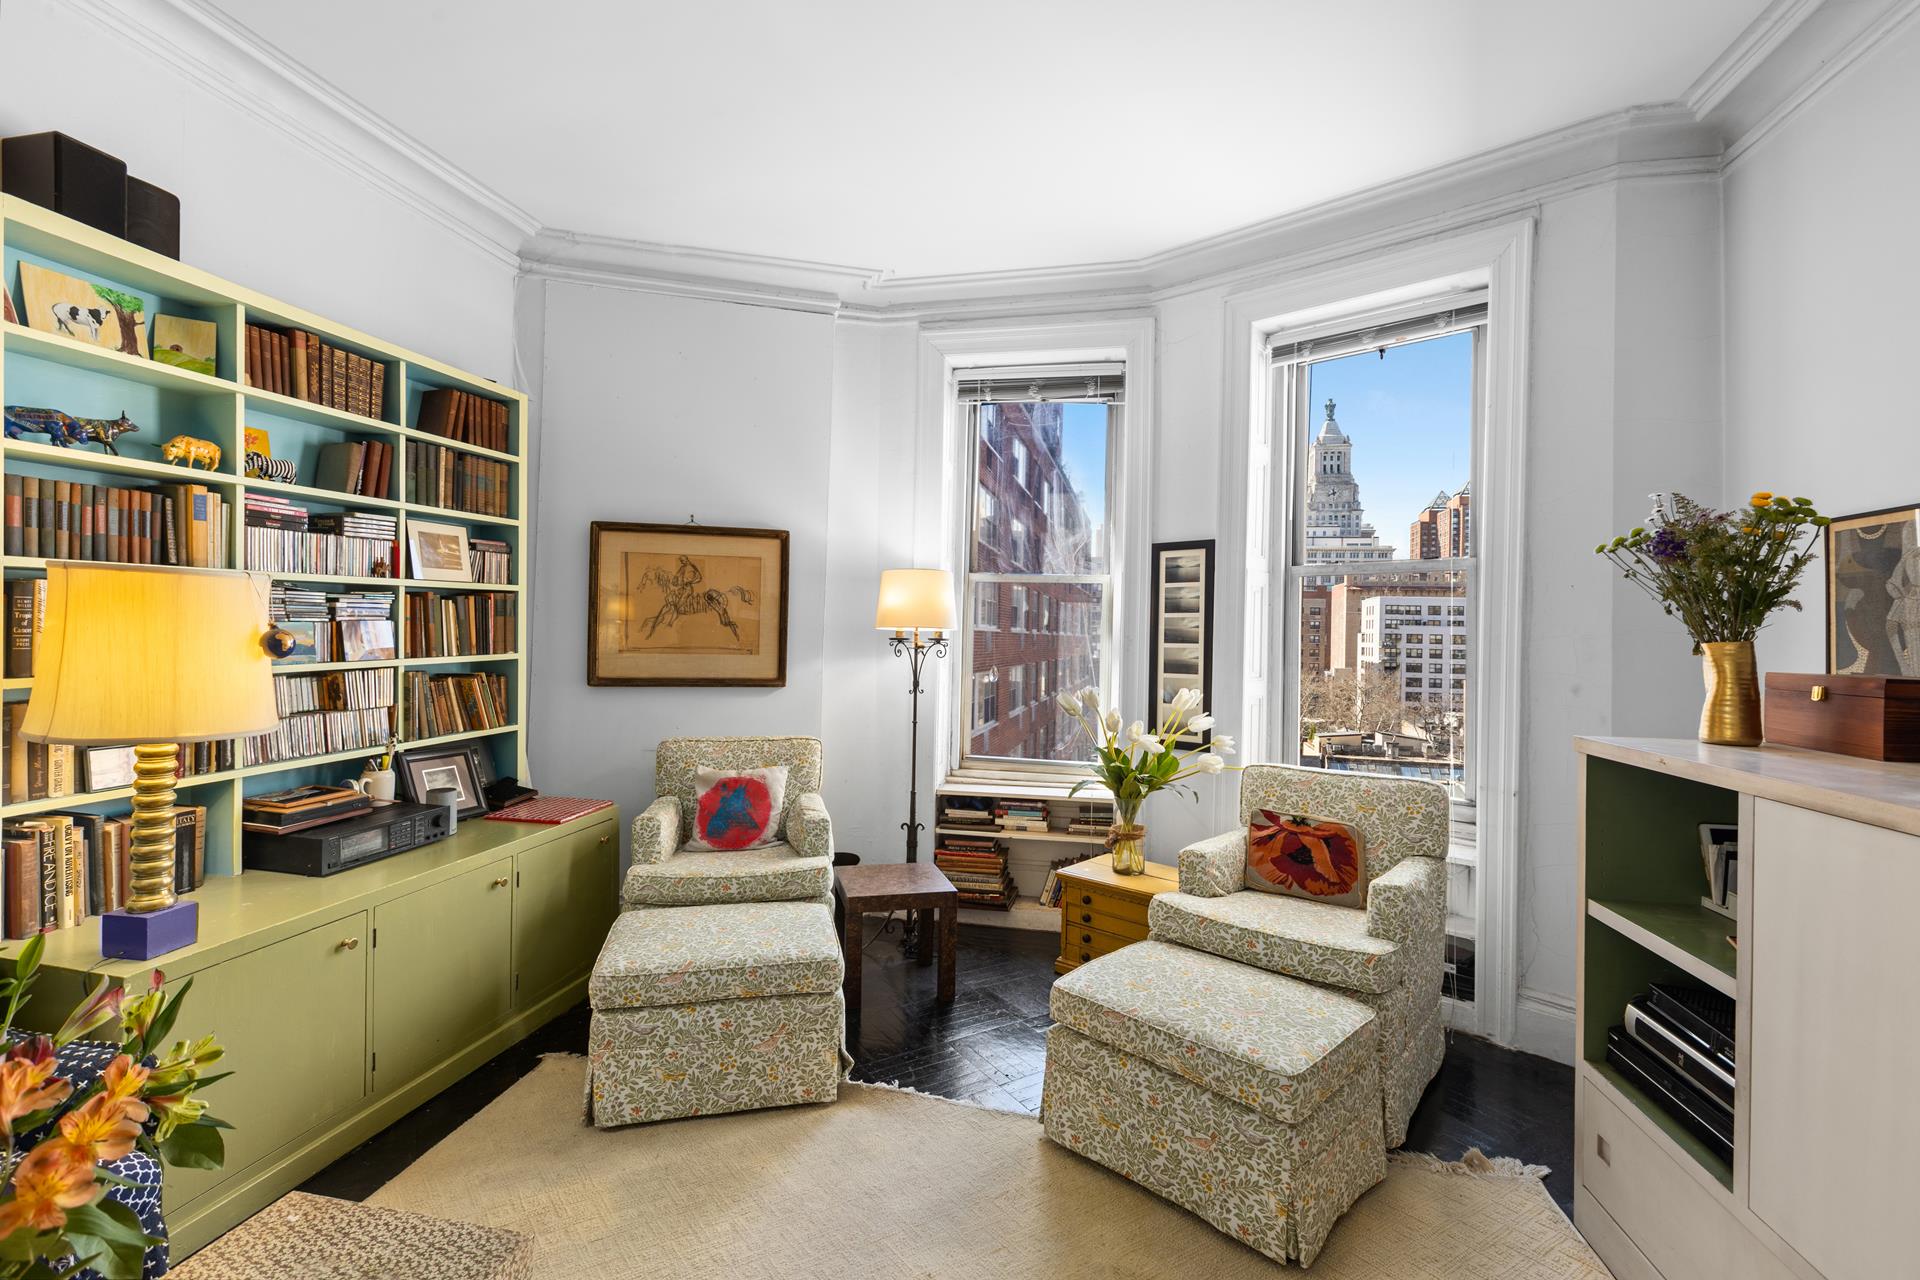 34 Gramercy Park 7C, Gramercy Park, Downtown, NYC - 3 Bedrooms  
2 Bathrooms  
7 Rooms - 